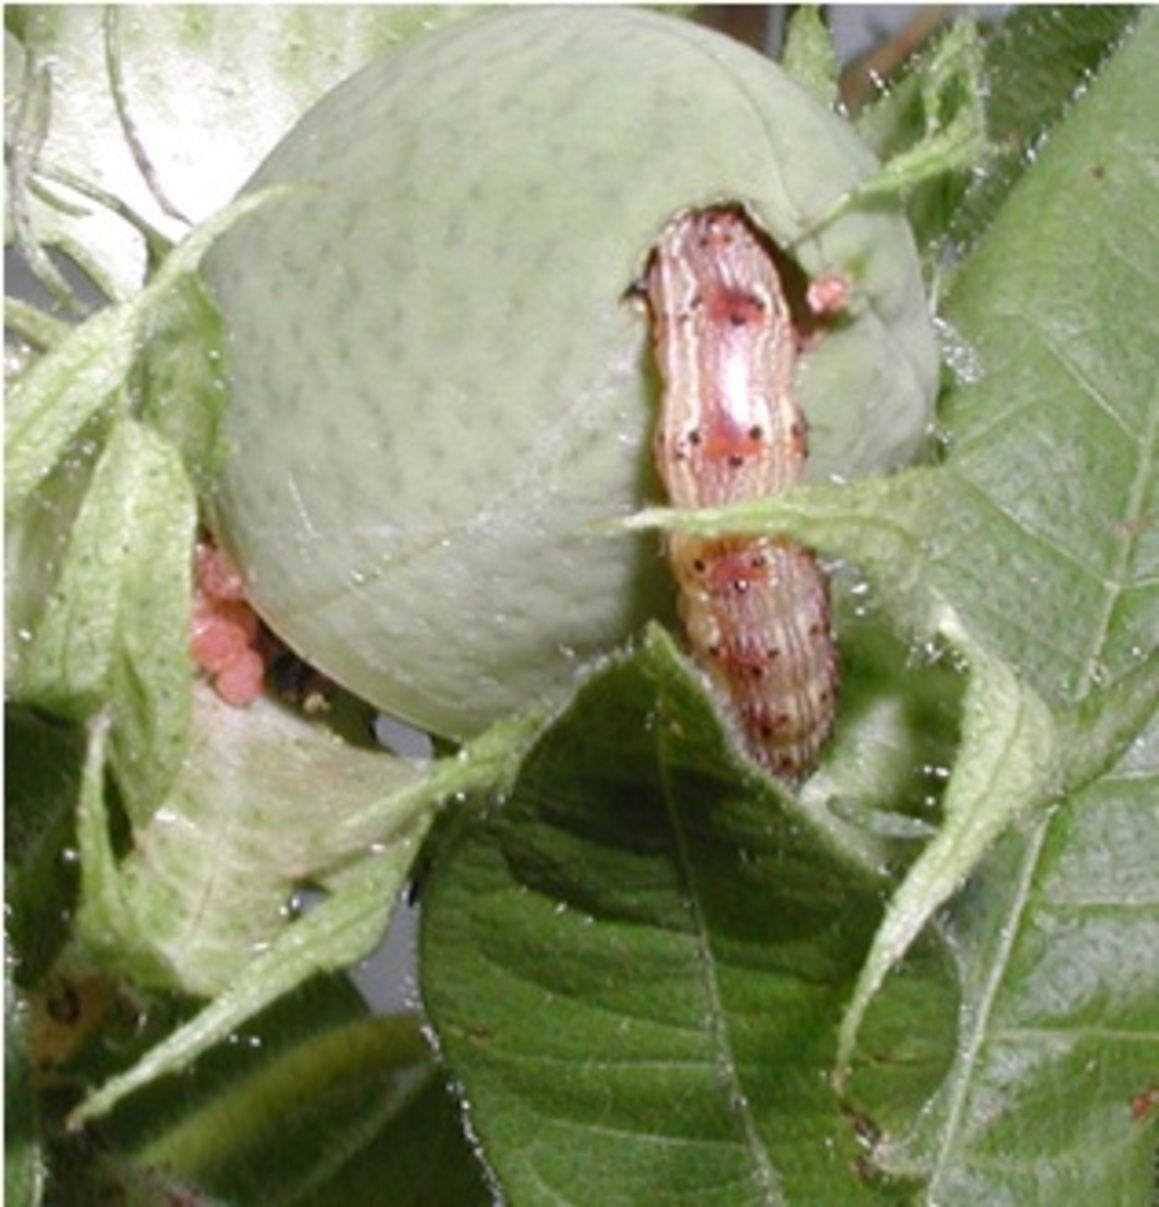 nsecticides from bacteria have been engineered into crop plants to thwart pests like Australia’s Helicoverpa armigera. 